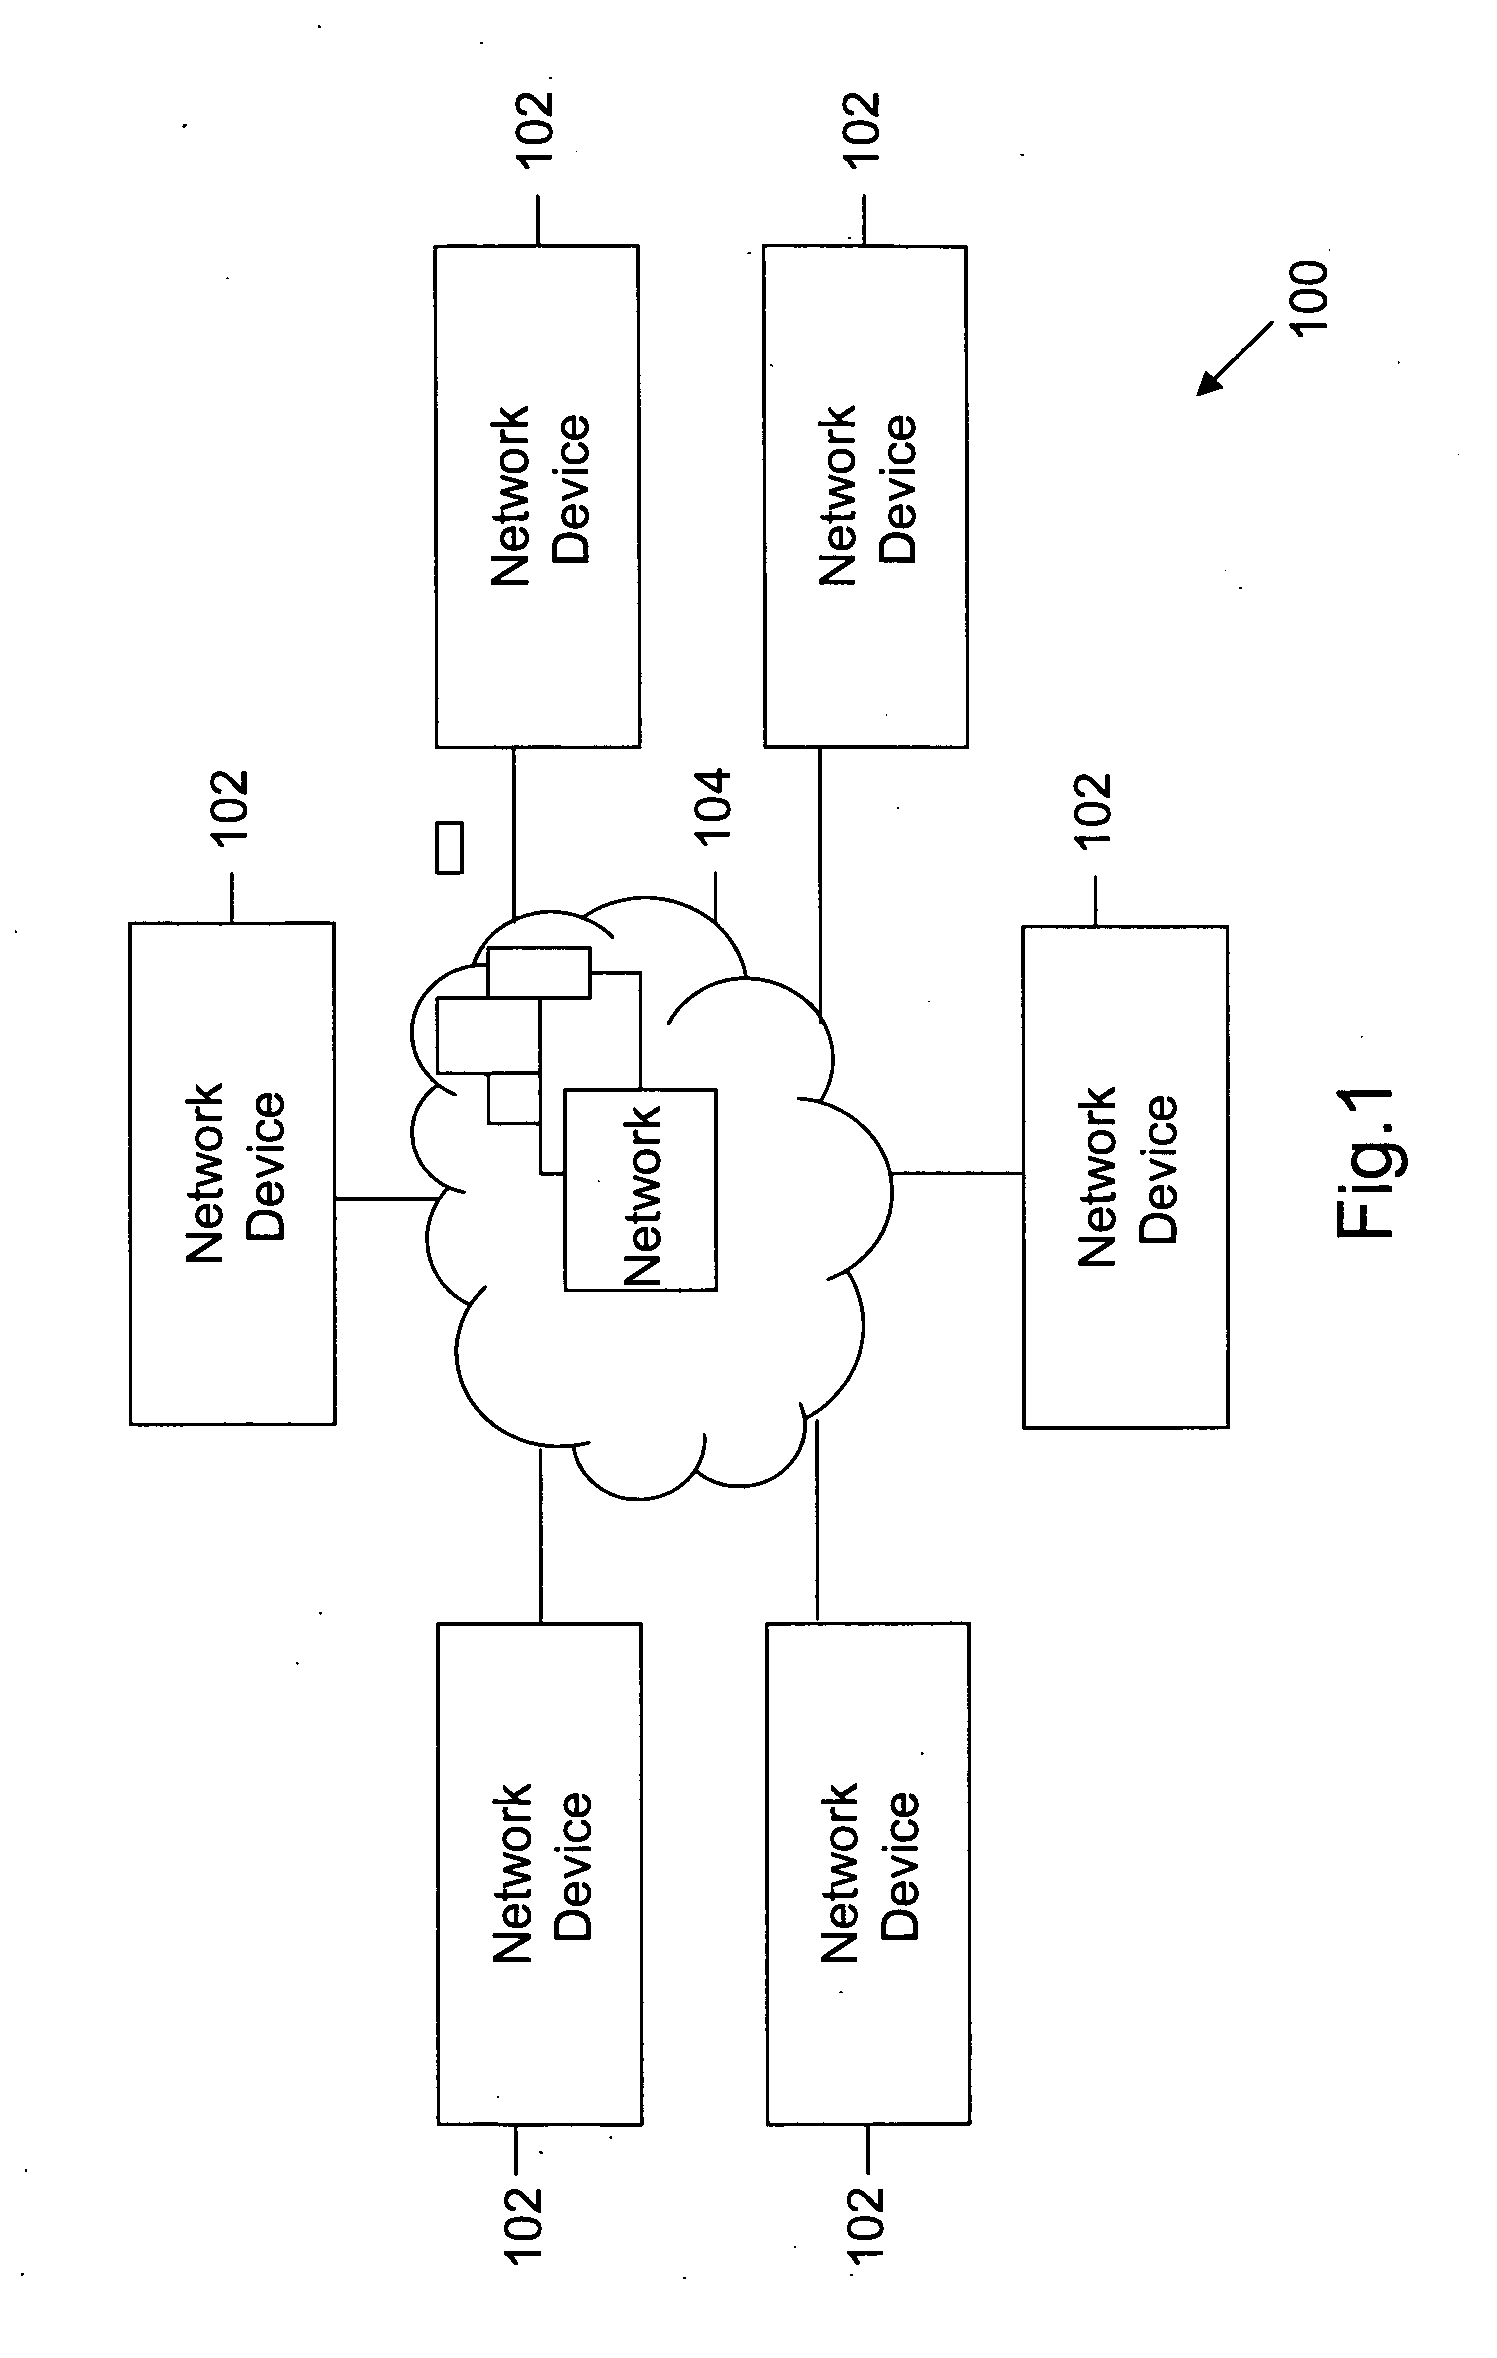 Method and system for removing dead access control entries (ACEs)